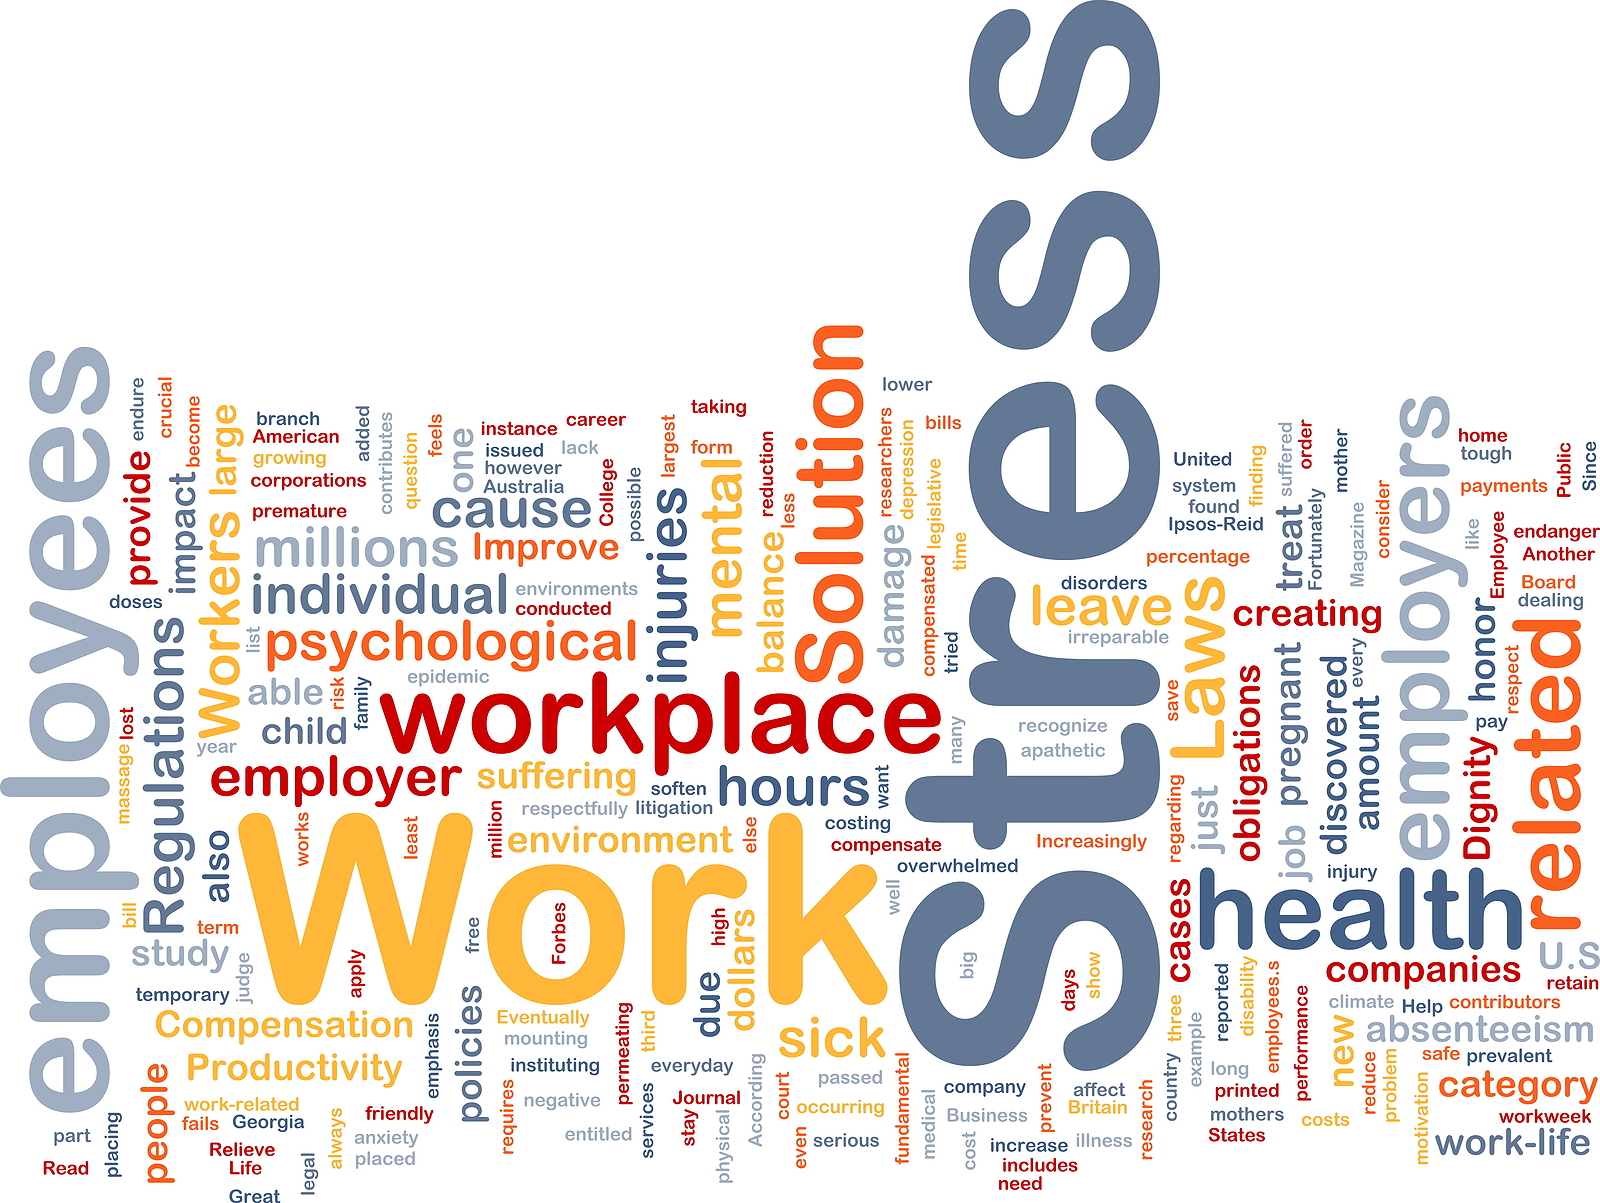 HSE Report shows poor mental health accounting for over half of work related illness